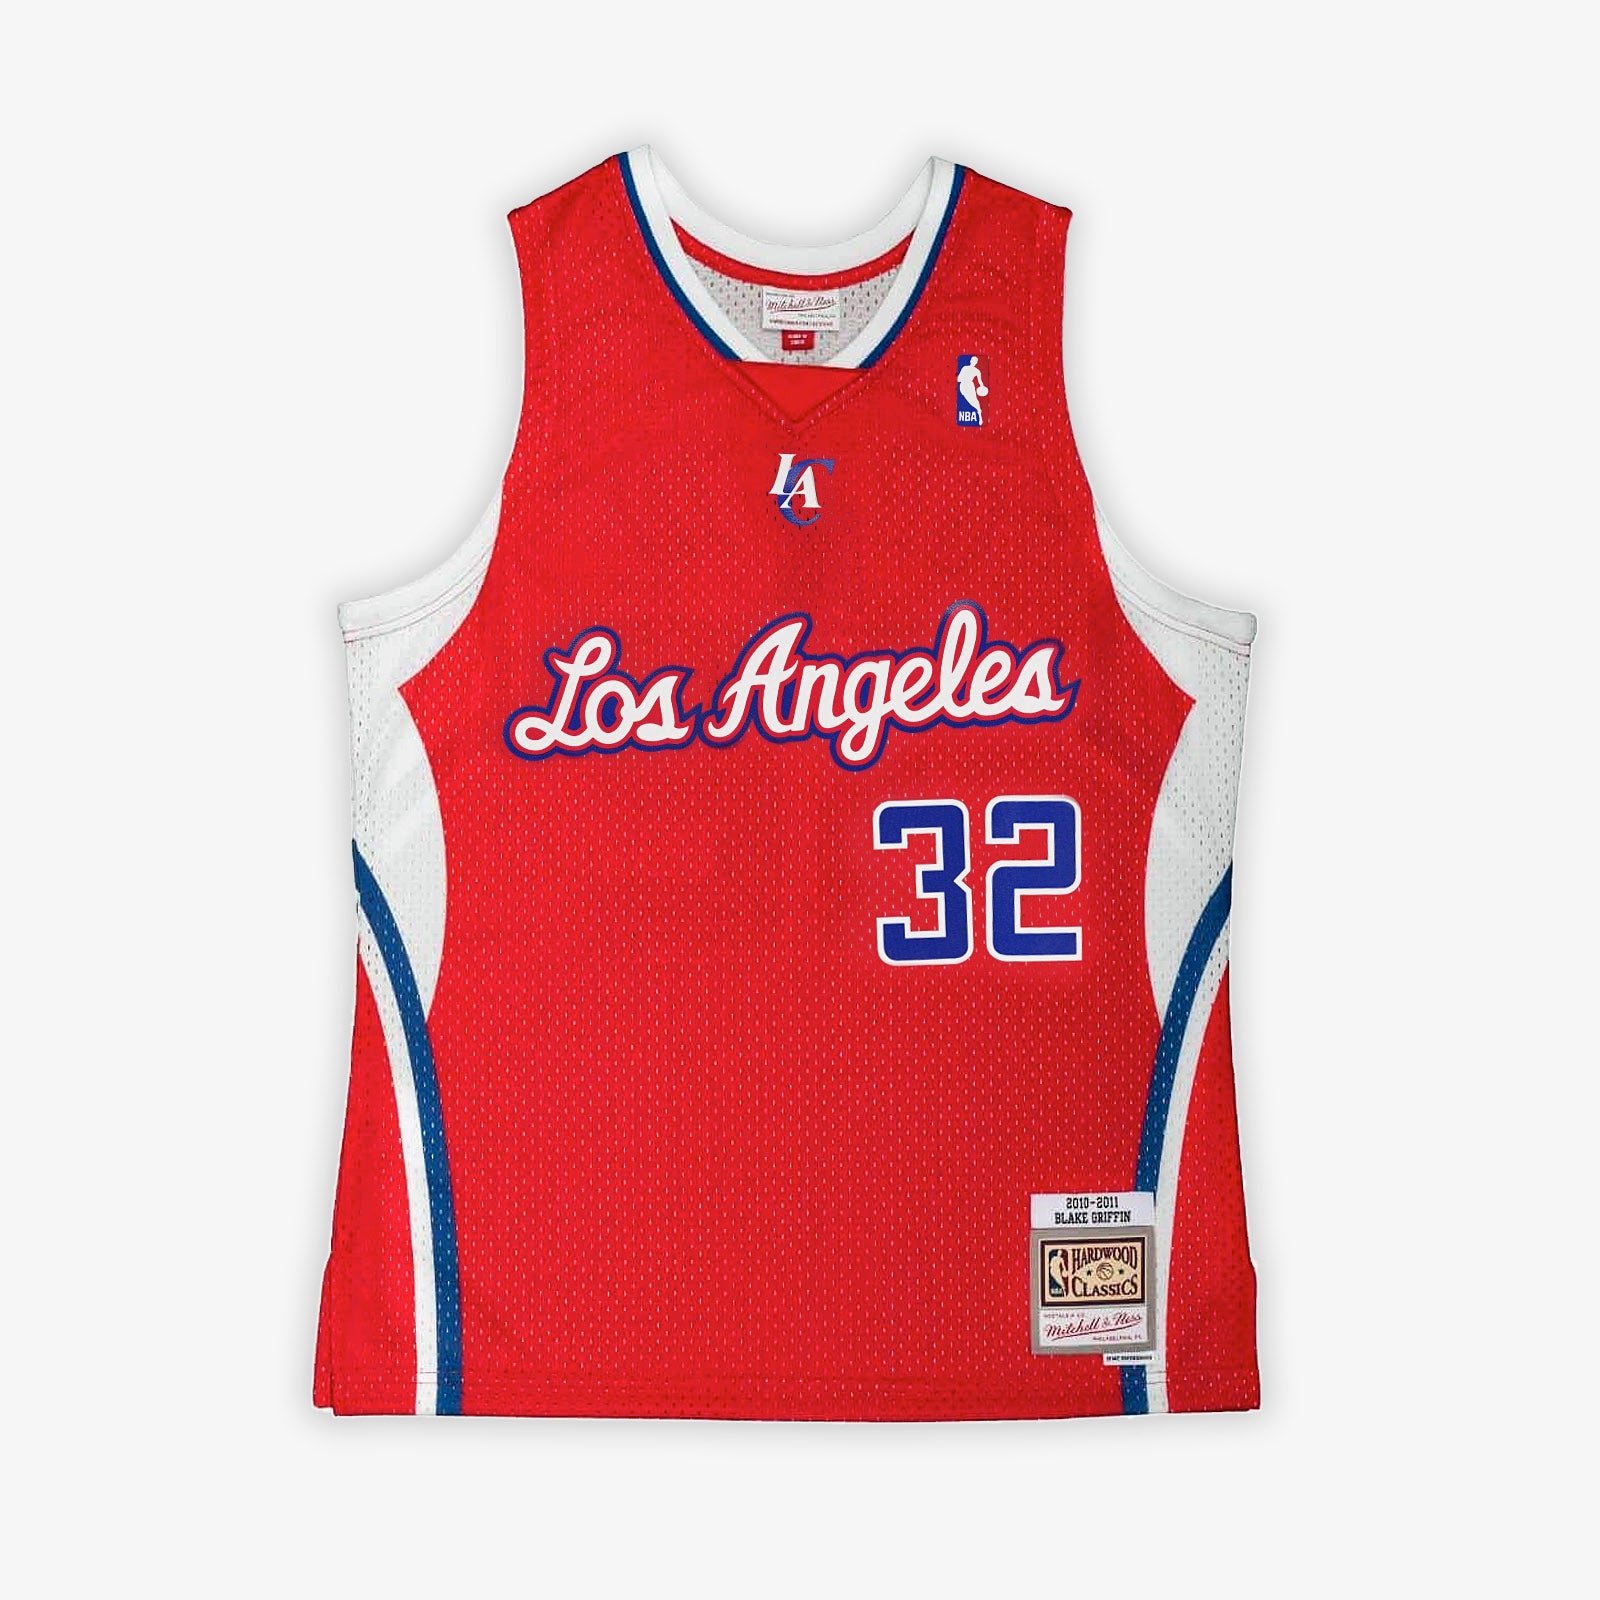 Los Angeles Clippers NBA Jerseys, Los Angeles Clippers